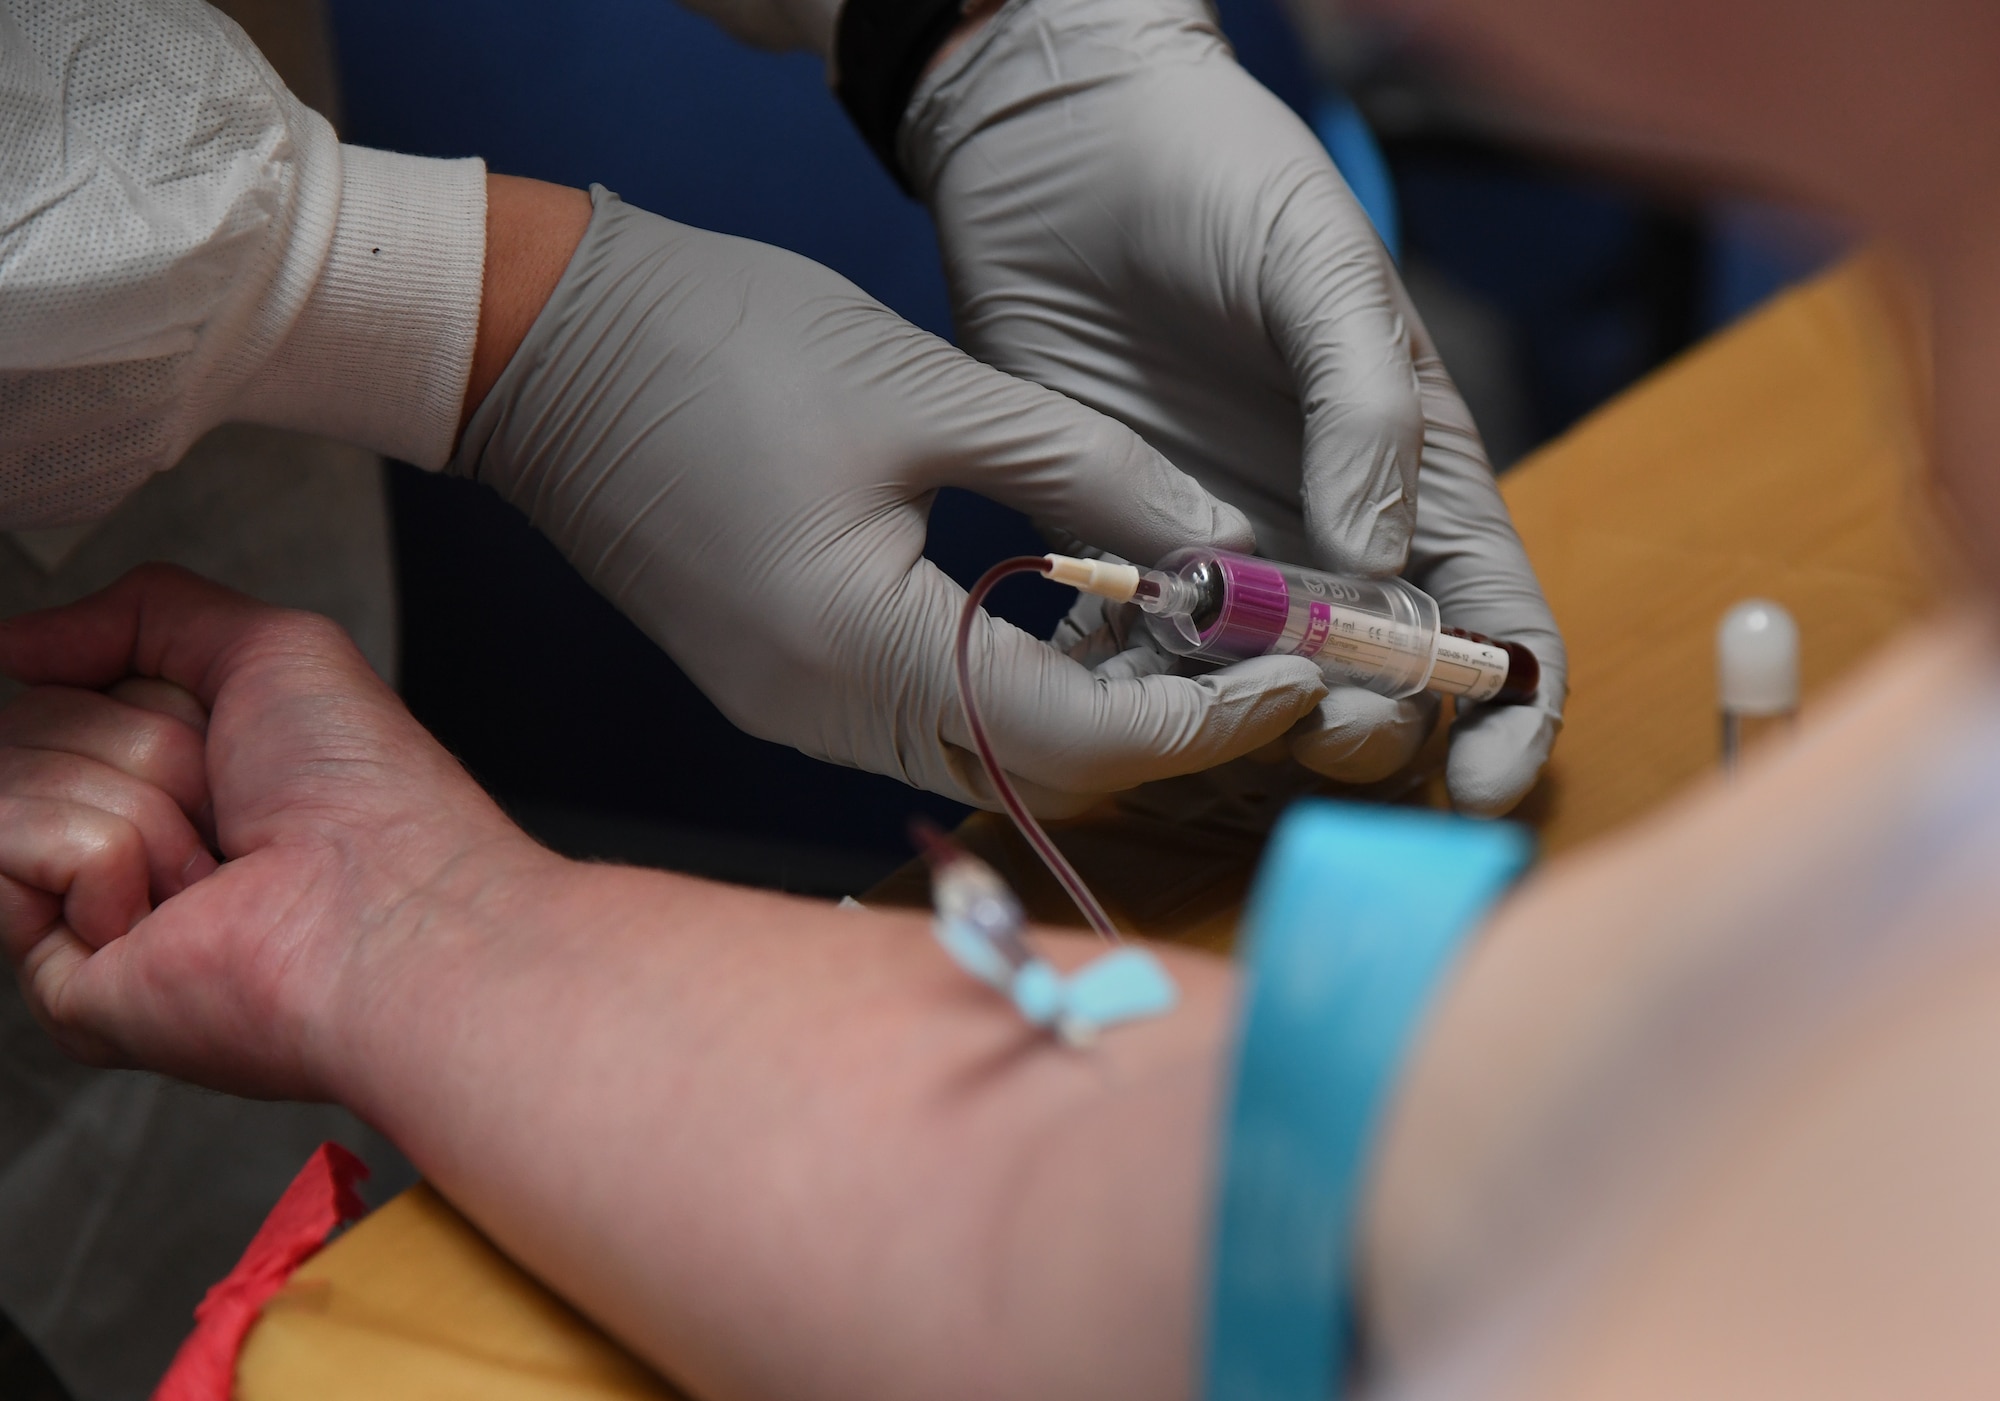 U.S. Air Force Airman Jared Fleming, 81st Diagnostic and Therapeutics Squadron medical lab technician, draws blood from Sheila Wood, spouse of U.S. Navy retired Scorekeeper Chester Wood, during the 81st Medical Group Health Expo inside the Keesler Medical Center at Keesler Air Force Base, Mississippi, Oct. 4, 2019. The 81st MDG hosted the walk-in event which included screenings for multiple types of cancer and chronic diseases in honor of Breast Cancer Awareness Month. (U.S. Air Force photo by Kemberly Groue)